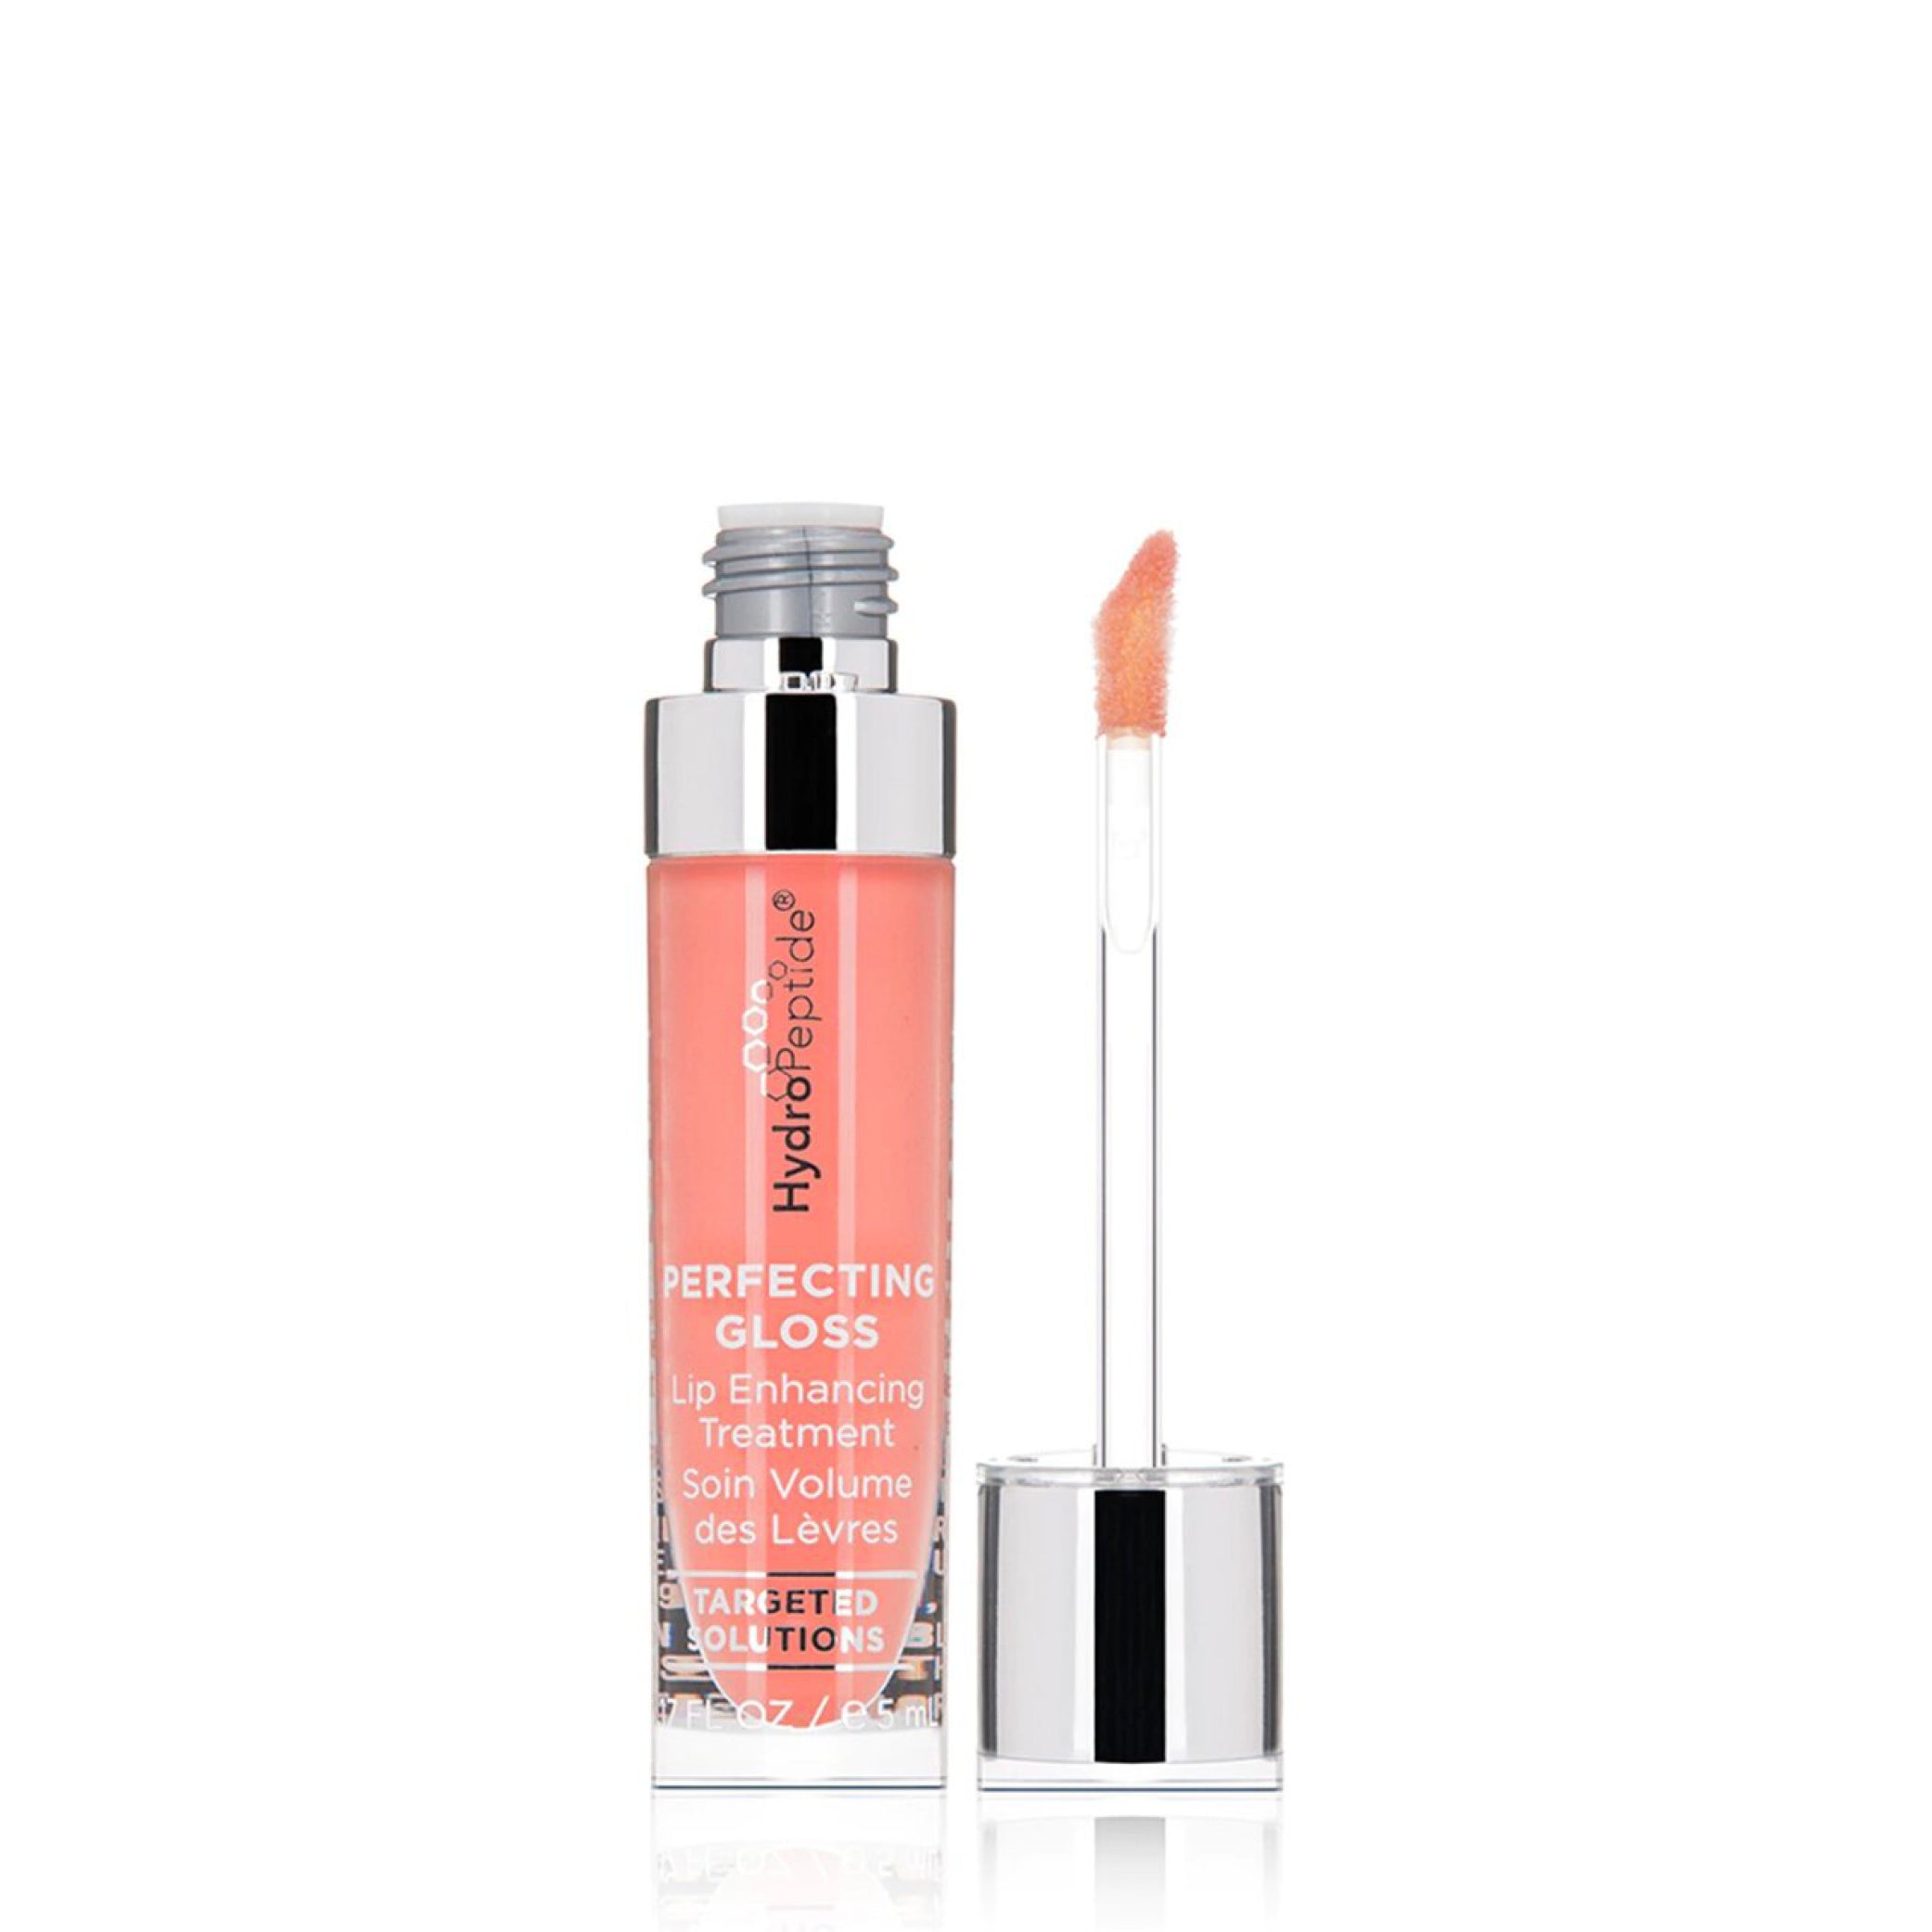 Perfecting Gloss - Soin volume des lèvres